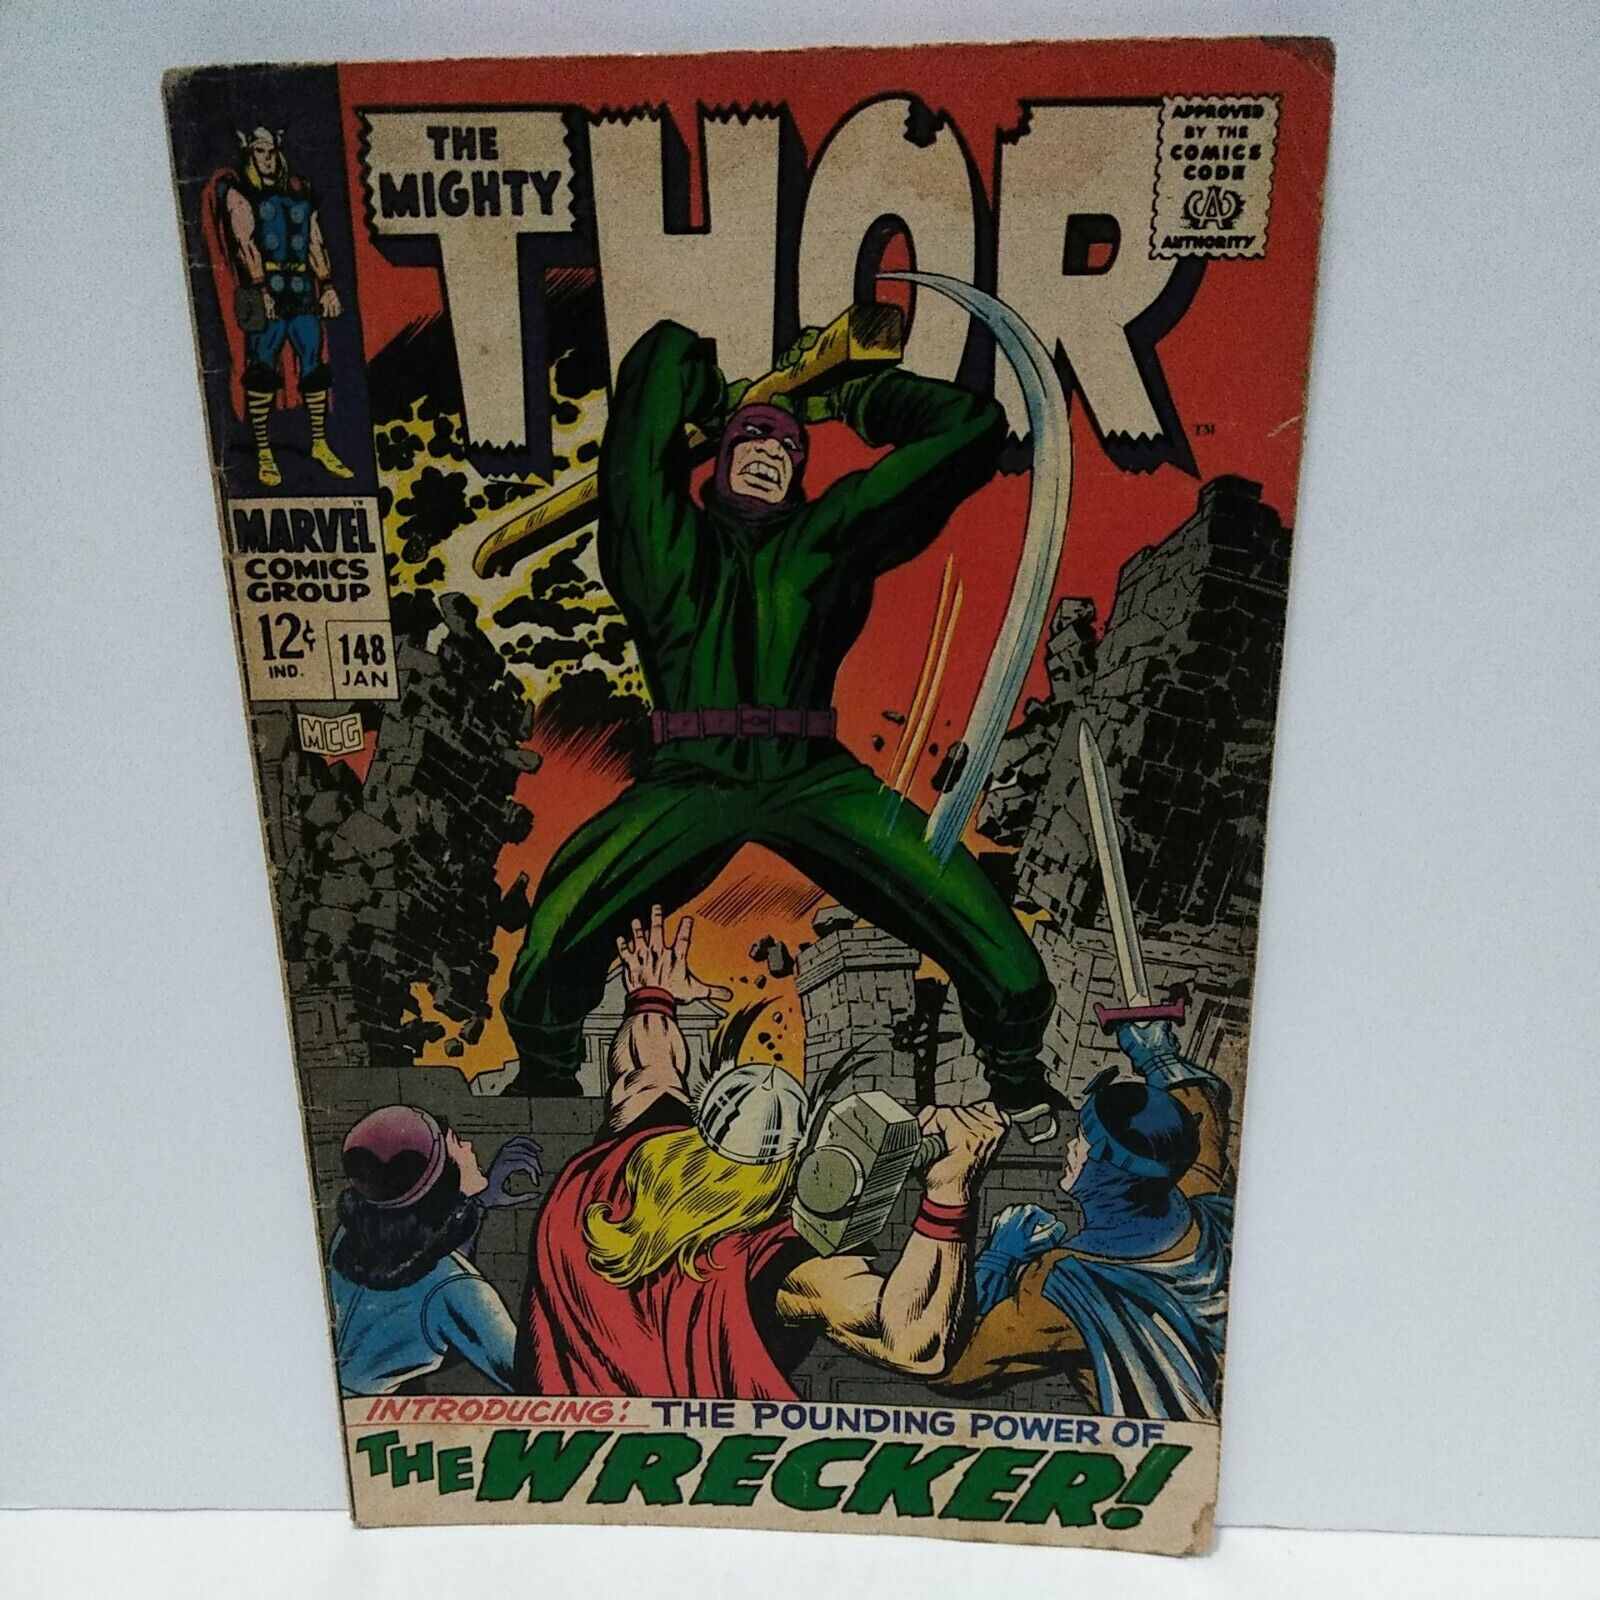 The Mighty Thor #148 Marvel 1968 1st Appearance of The Wrecker